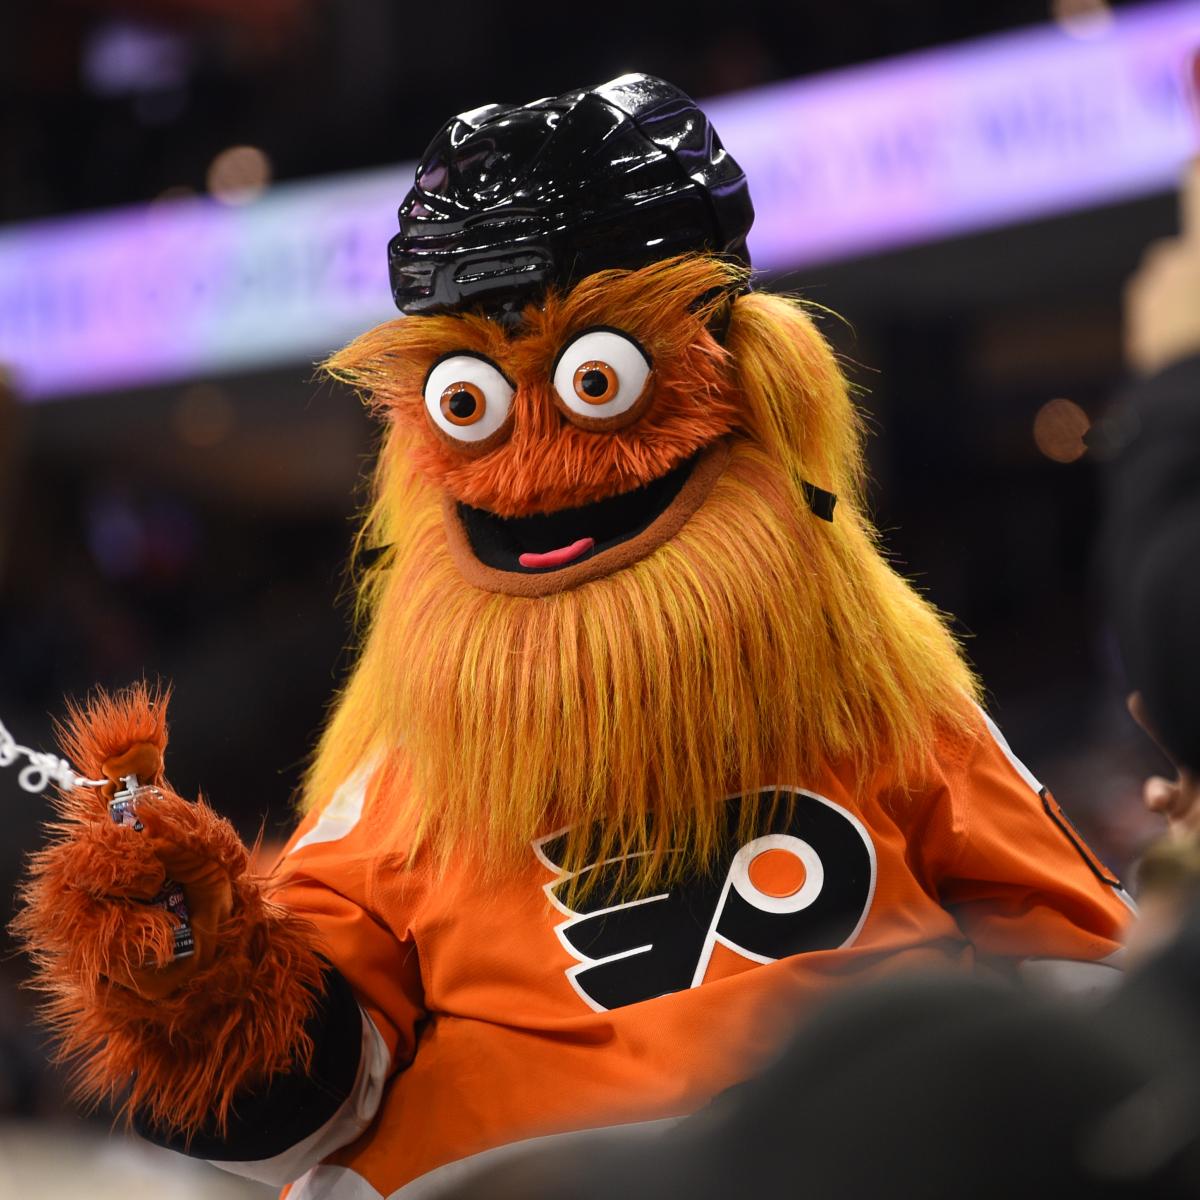 Why are the Philadelphia Flyers called the Flyers?